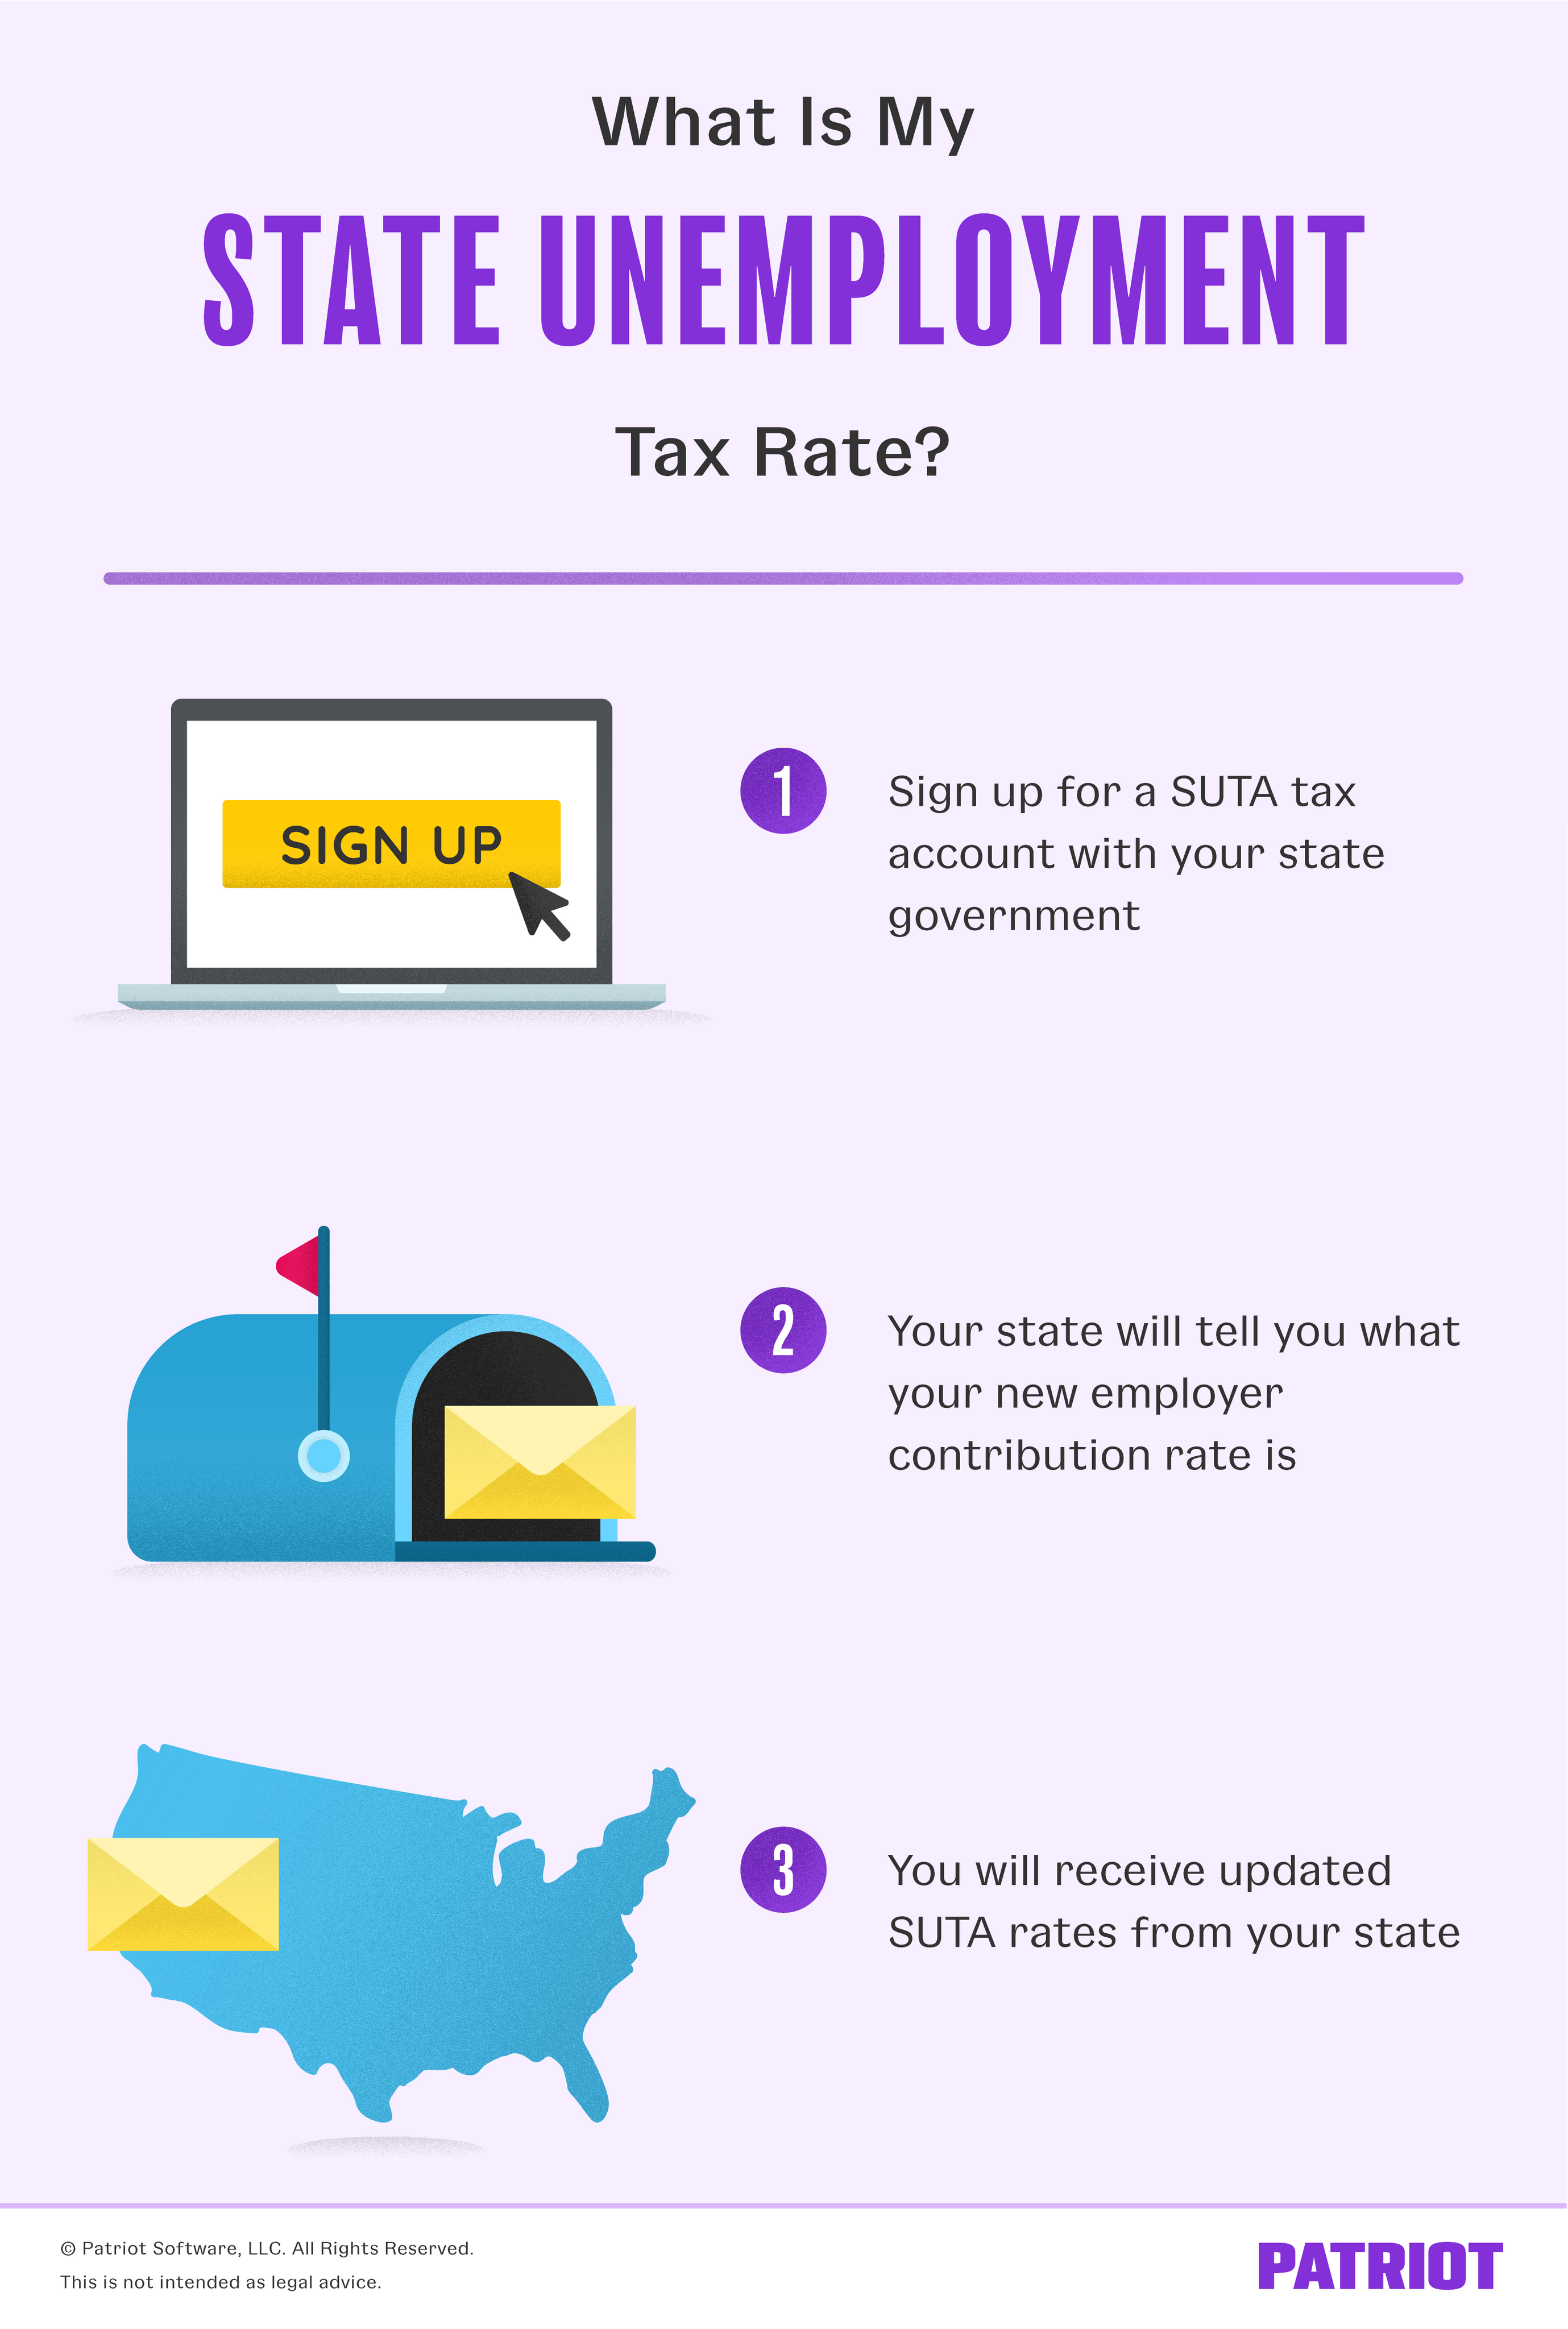 answers the question what is my state unemployment tax rate? with a three-step process, including signing up, receiving notice from state for new employer rate, and receiving updated rates from state